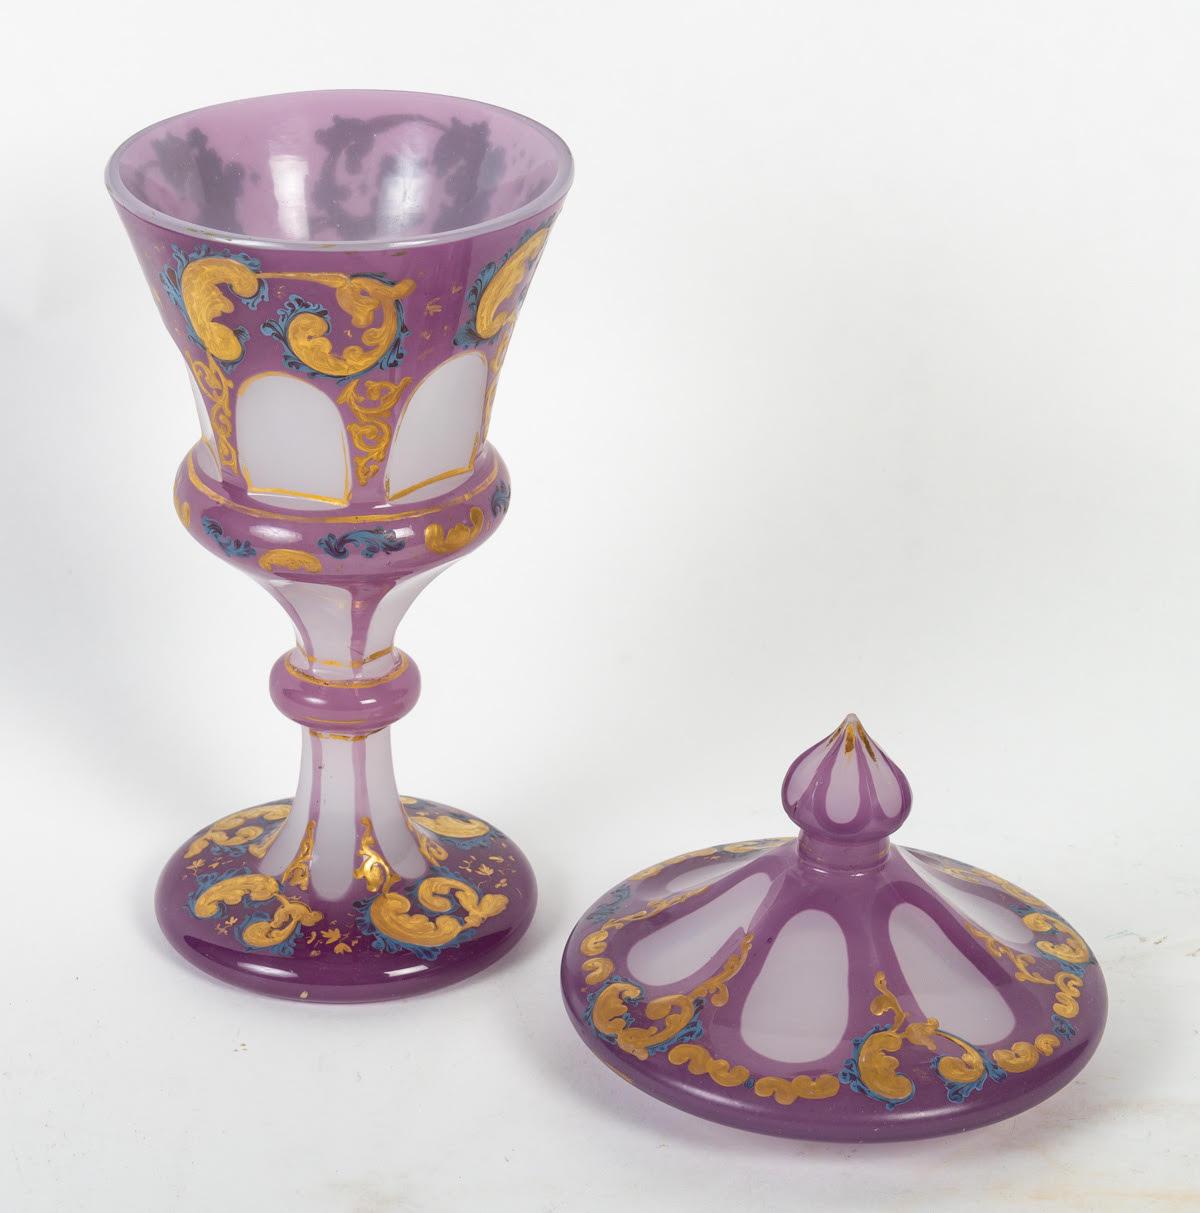 Opaline Overlay Covered Tumbler, 19th Century.

Napoleon III period gold-enameled covered goblet, 19th century in Opaline Overlay, circa 1850.

Dimensions: h: 29cm, d: 13,5cm